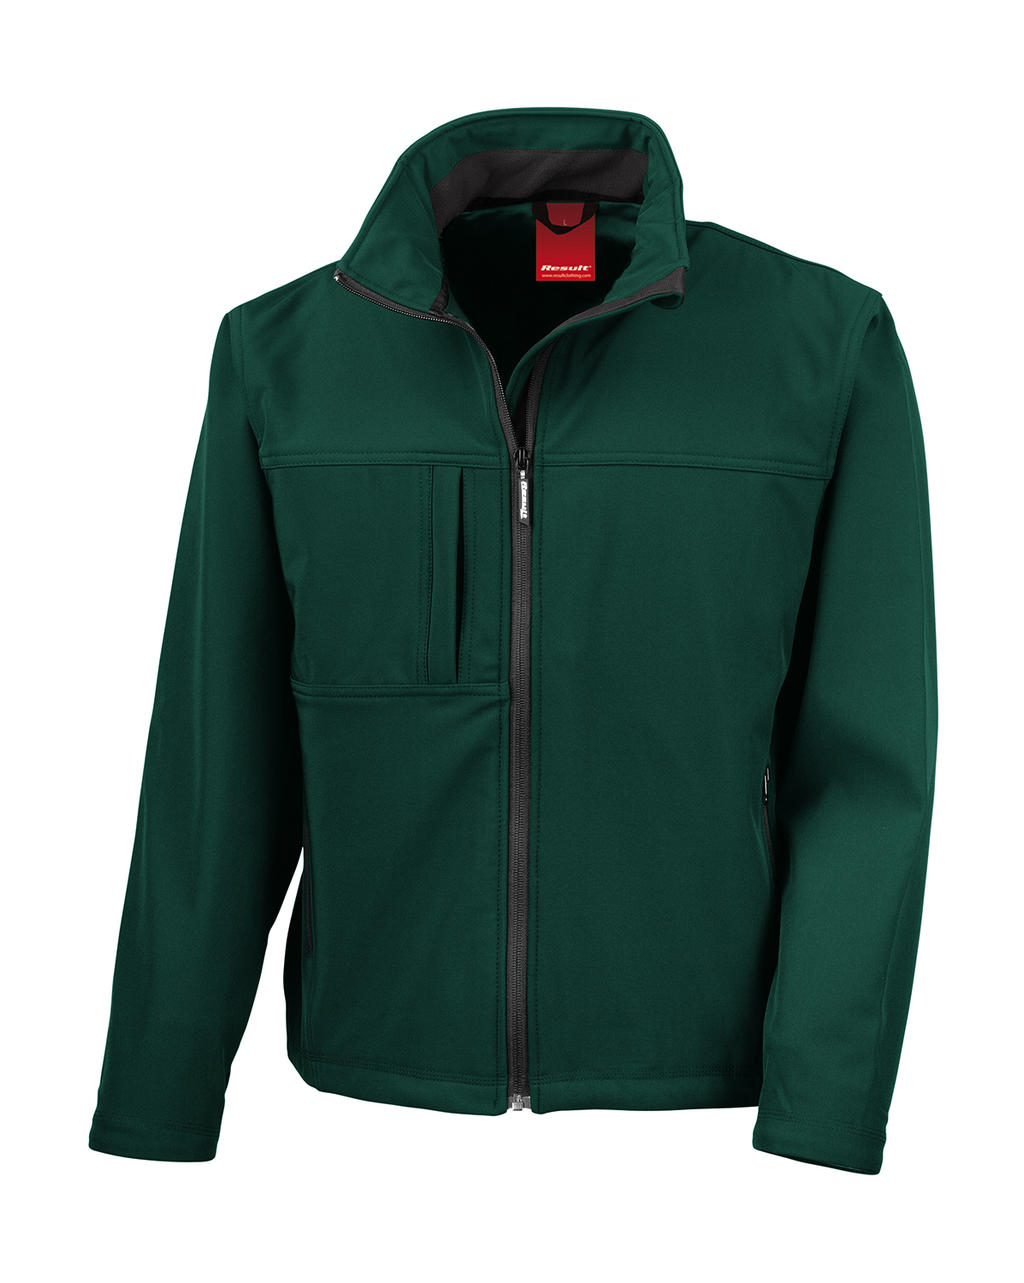  Mens Classic Softshell Jacket in Farbe Bottle Green